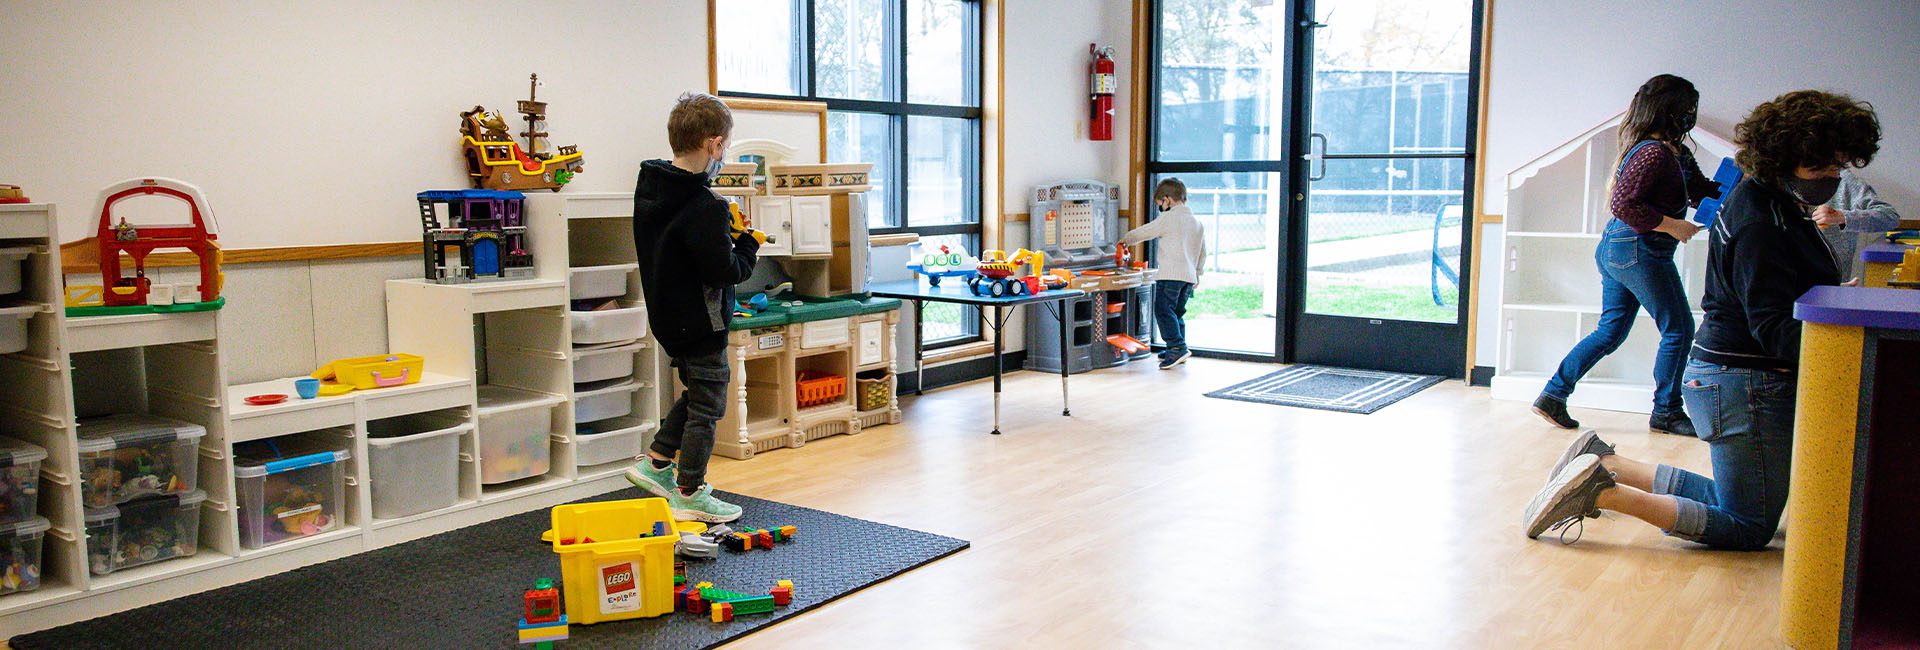 kids playing in dedicated childcare room in modern gym